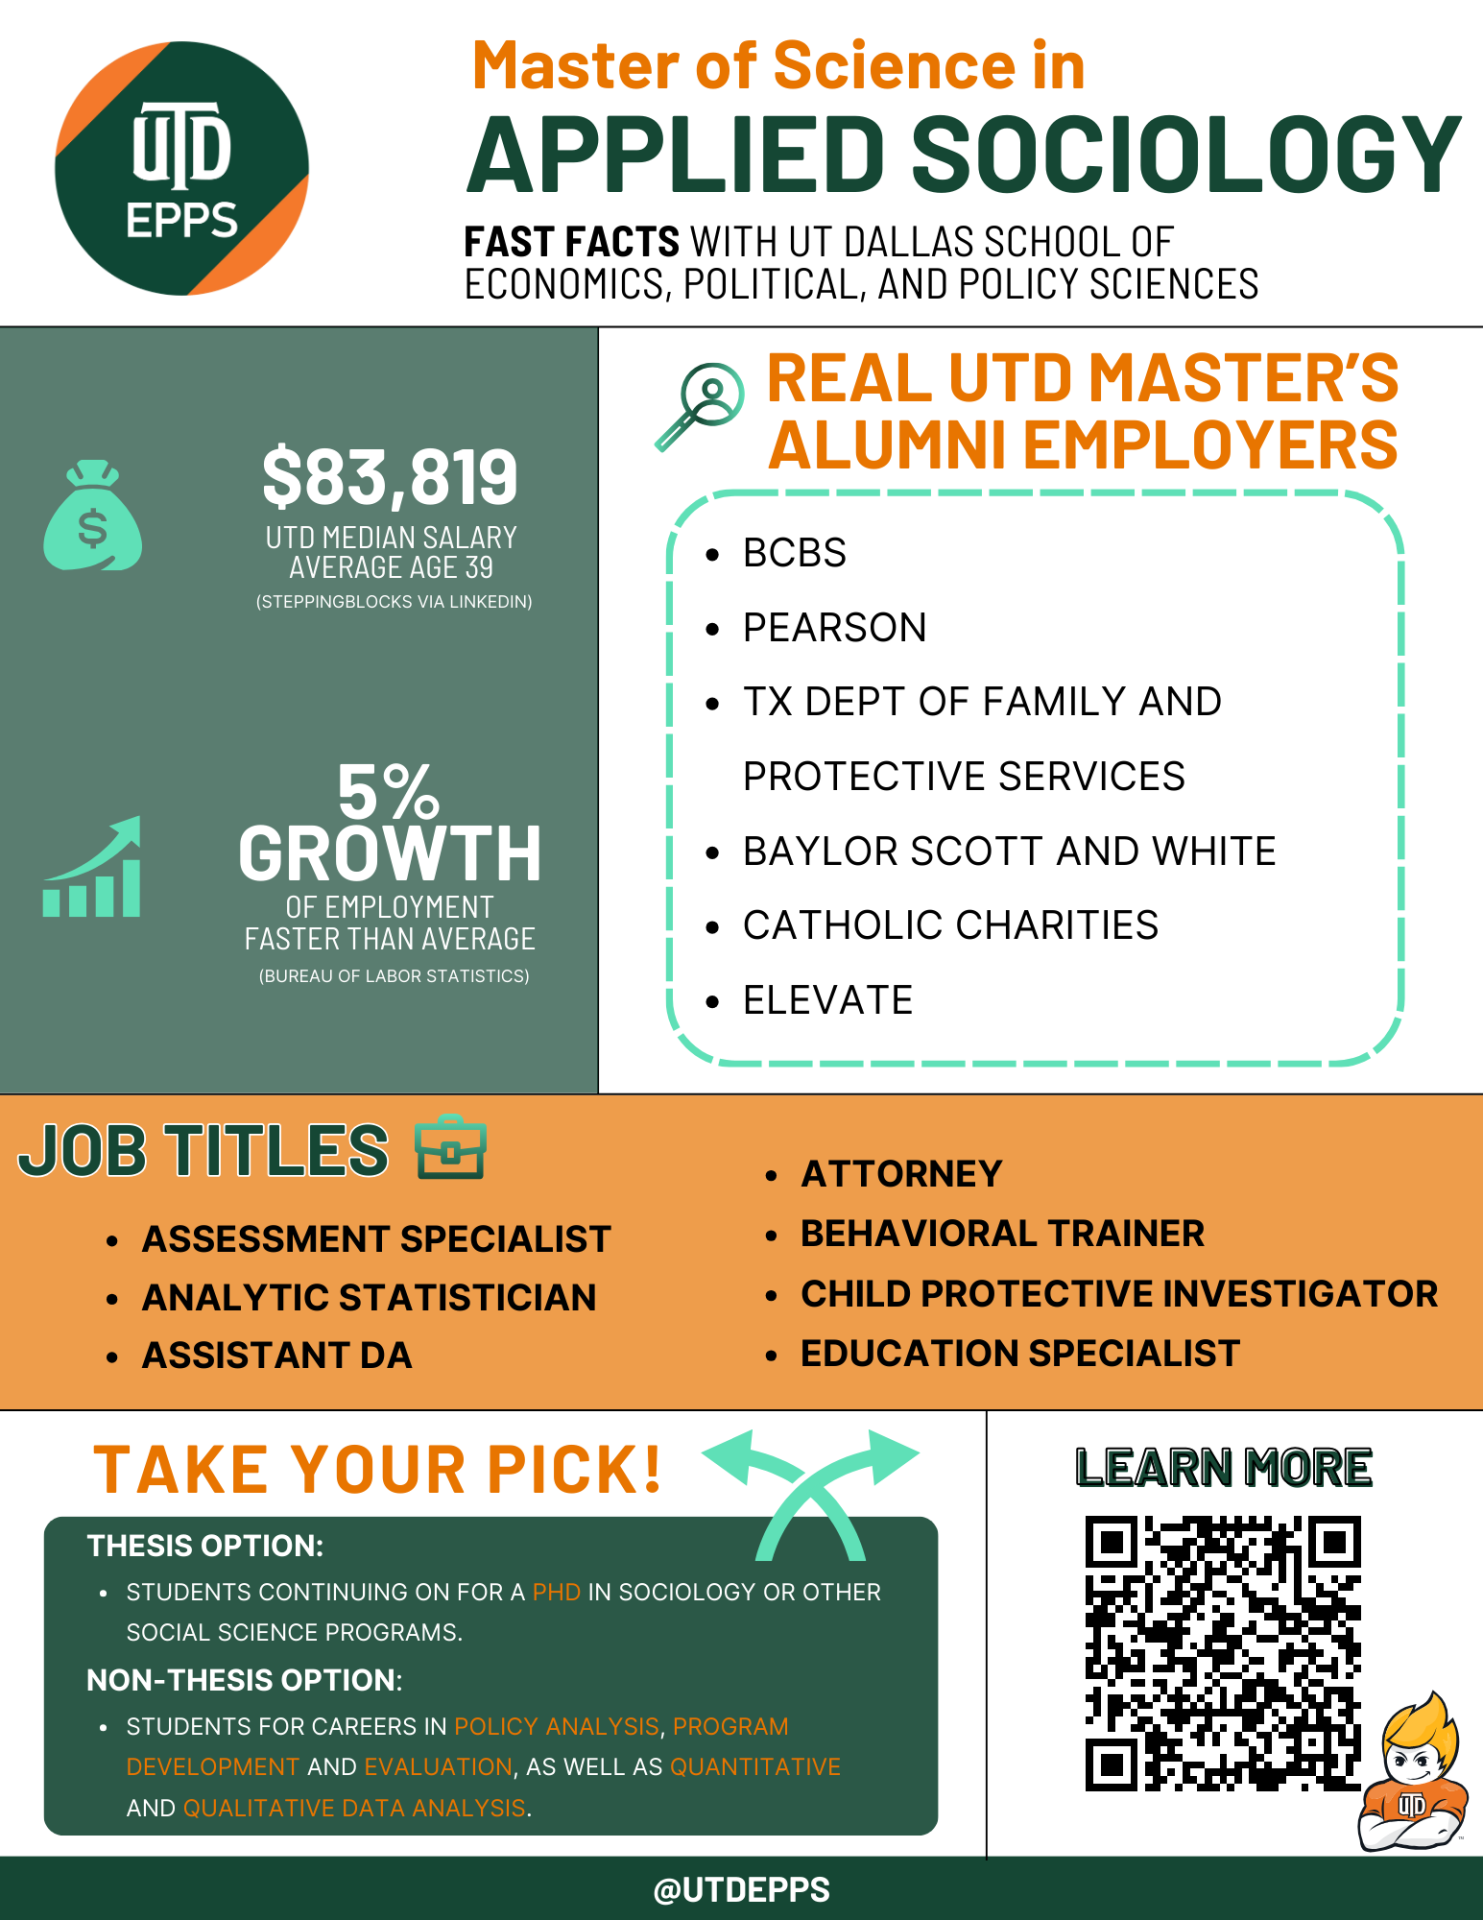 Master of Science in Applied Sociology. Fast Facts with Ut Dallas school of economics, political, and policy sciences.

$83,819 is the UTD Median Salary (Average age 39). Data is from Steppingblocks via Linkedin. 5% Growth of employment which is faster than average. Data is from Bureau of Labor Statistics.

REAL UTD MASTER’S ALUMNI EMPLOYERS include:
BCBS
Pearson
TX Dept of Family and Protective Services
Baylor Scott and White
Catholic Charities
Elevate

Job titles include:
Assessment specialist
Analytic statistician
Assistant DA
Attorney
Behavioral Trainer
Child Protective Investigator
Education Specialist

TAKE YOUR PICK!
Thesis Option: 
students continuing on for a PhD in sociology or other social science programs.
Non-Thesis Option:
students for careers in policy analysis, program development and evaluation, as well as quantitative and qualitative data analysis.

Learn more by scanning the QR code.

@UTDEPPS